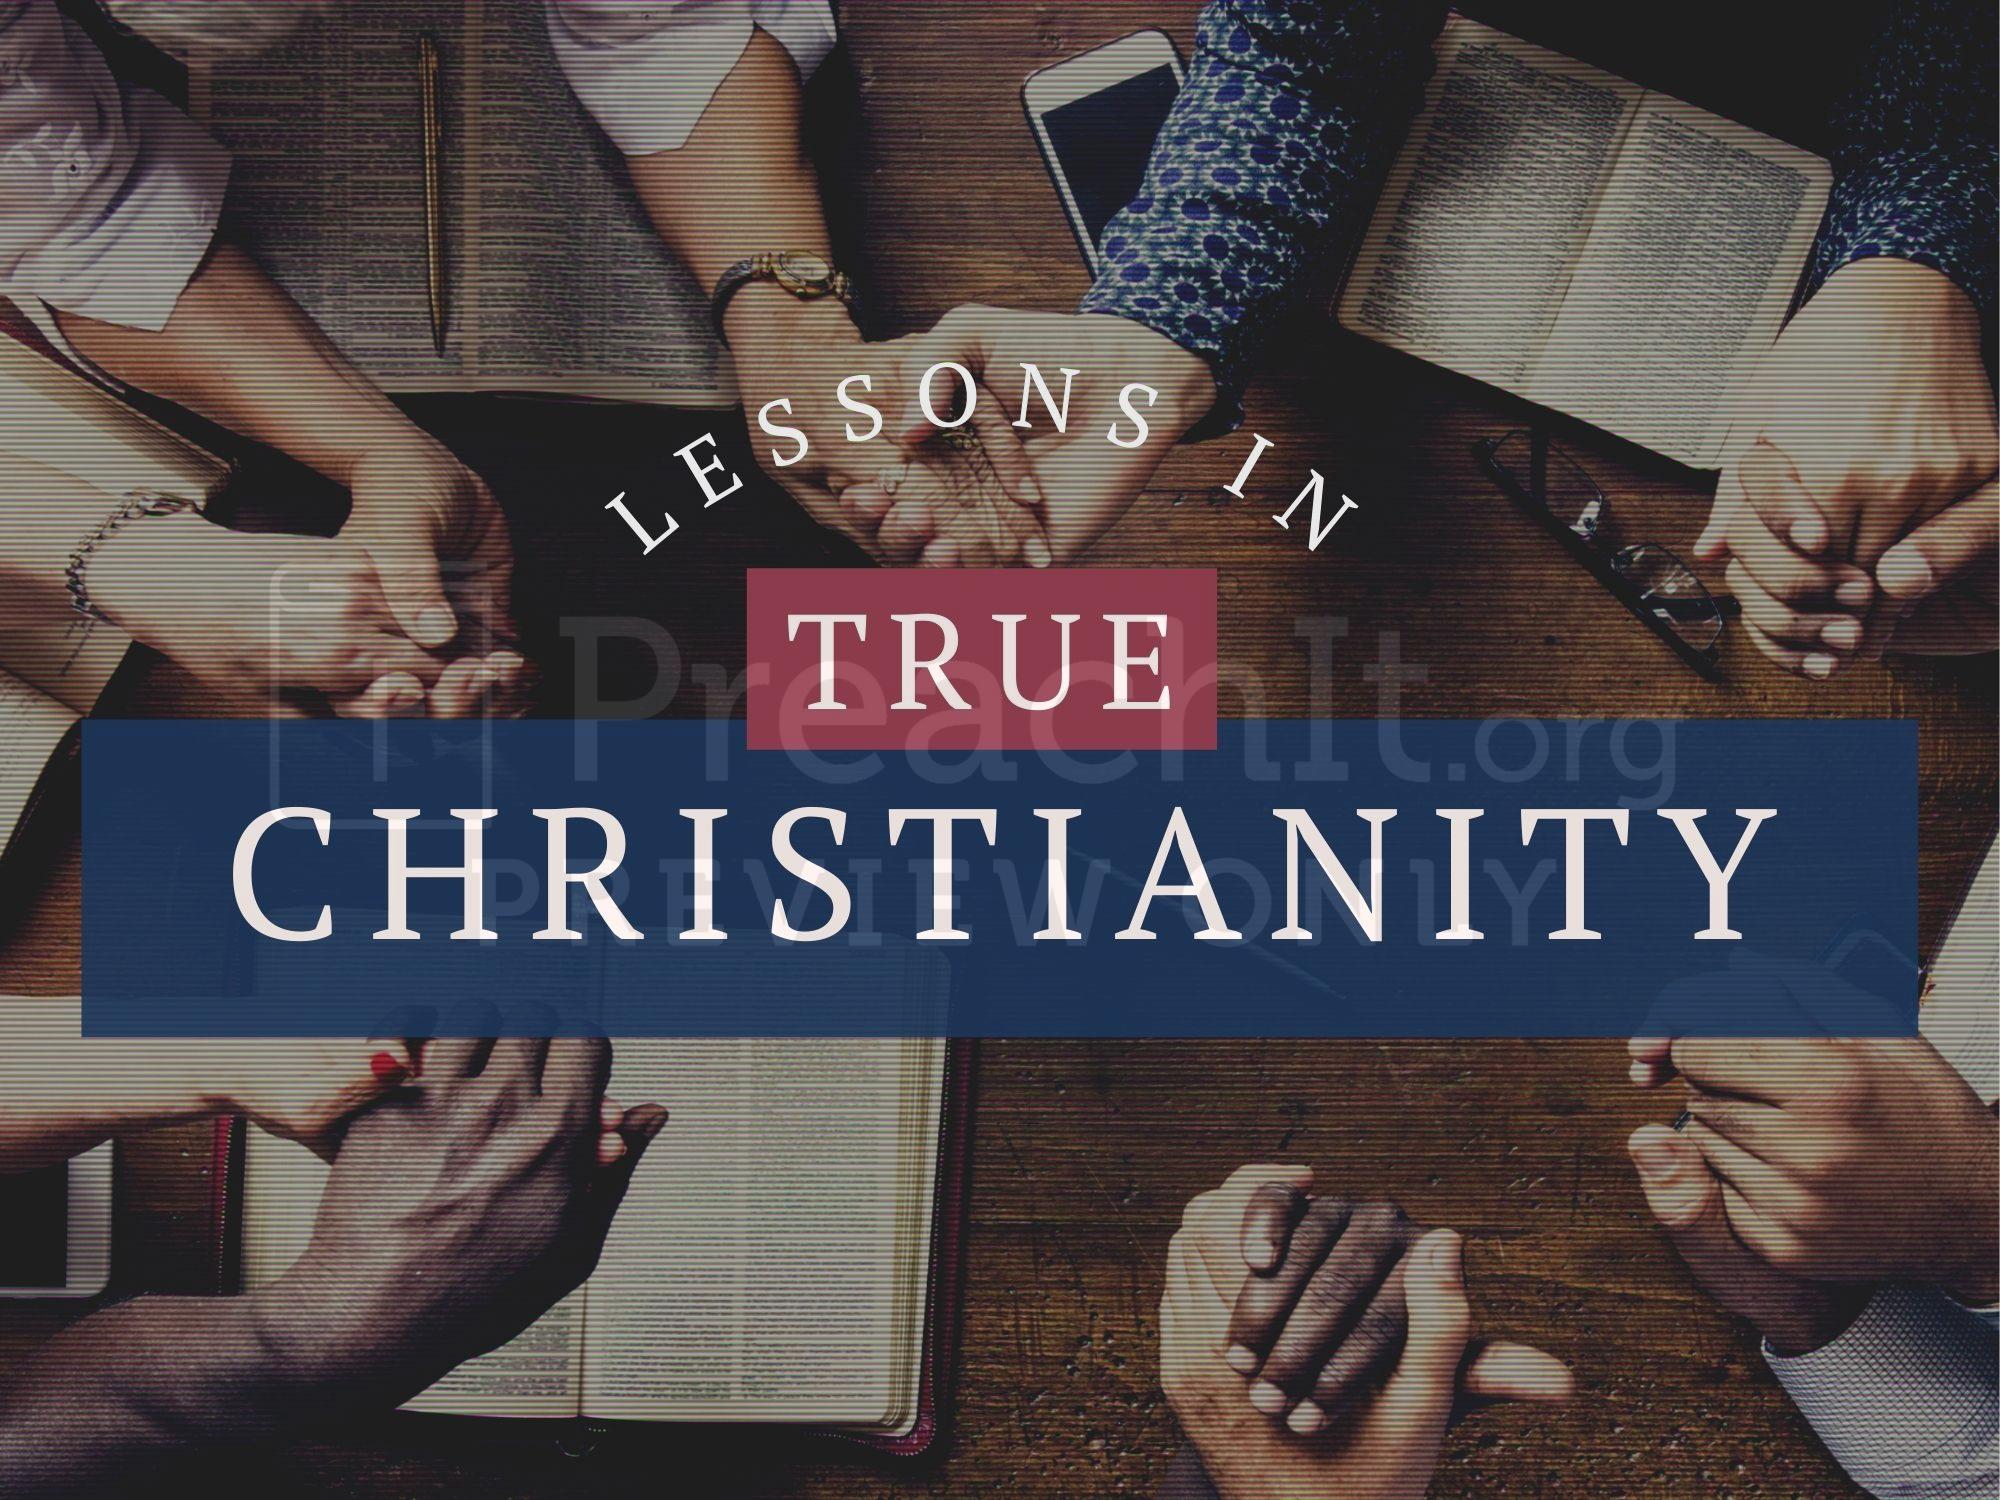 Lesson 2: Lessons in True Christianity